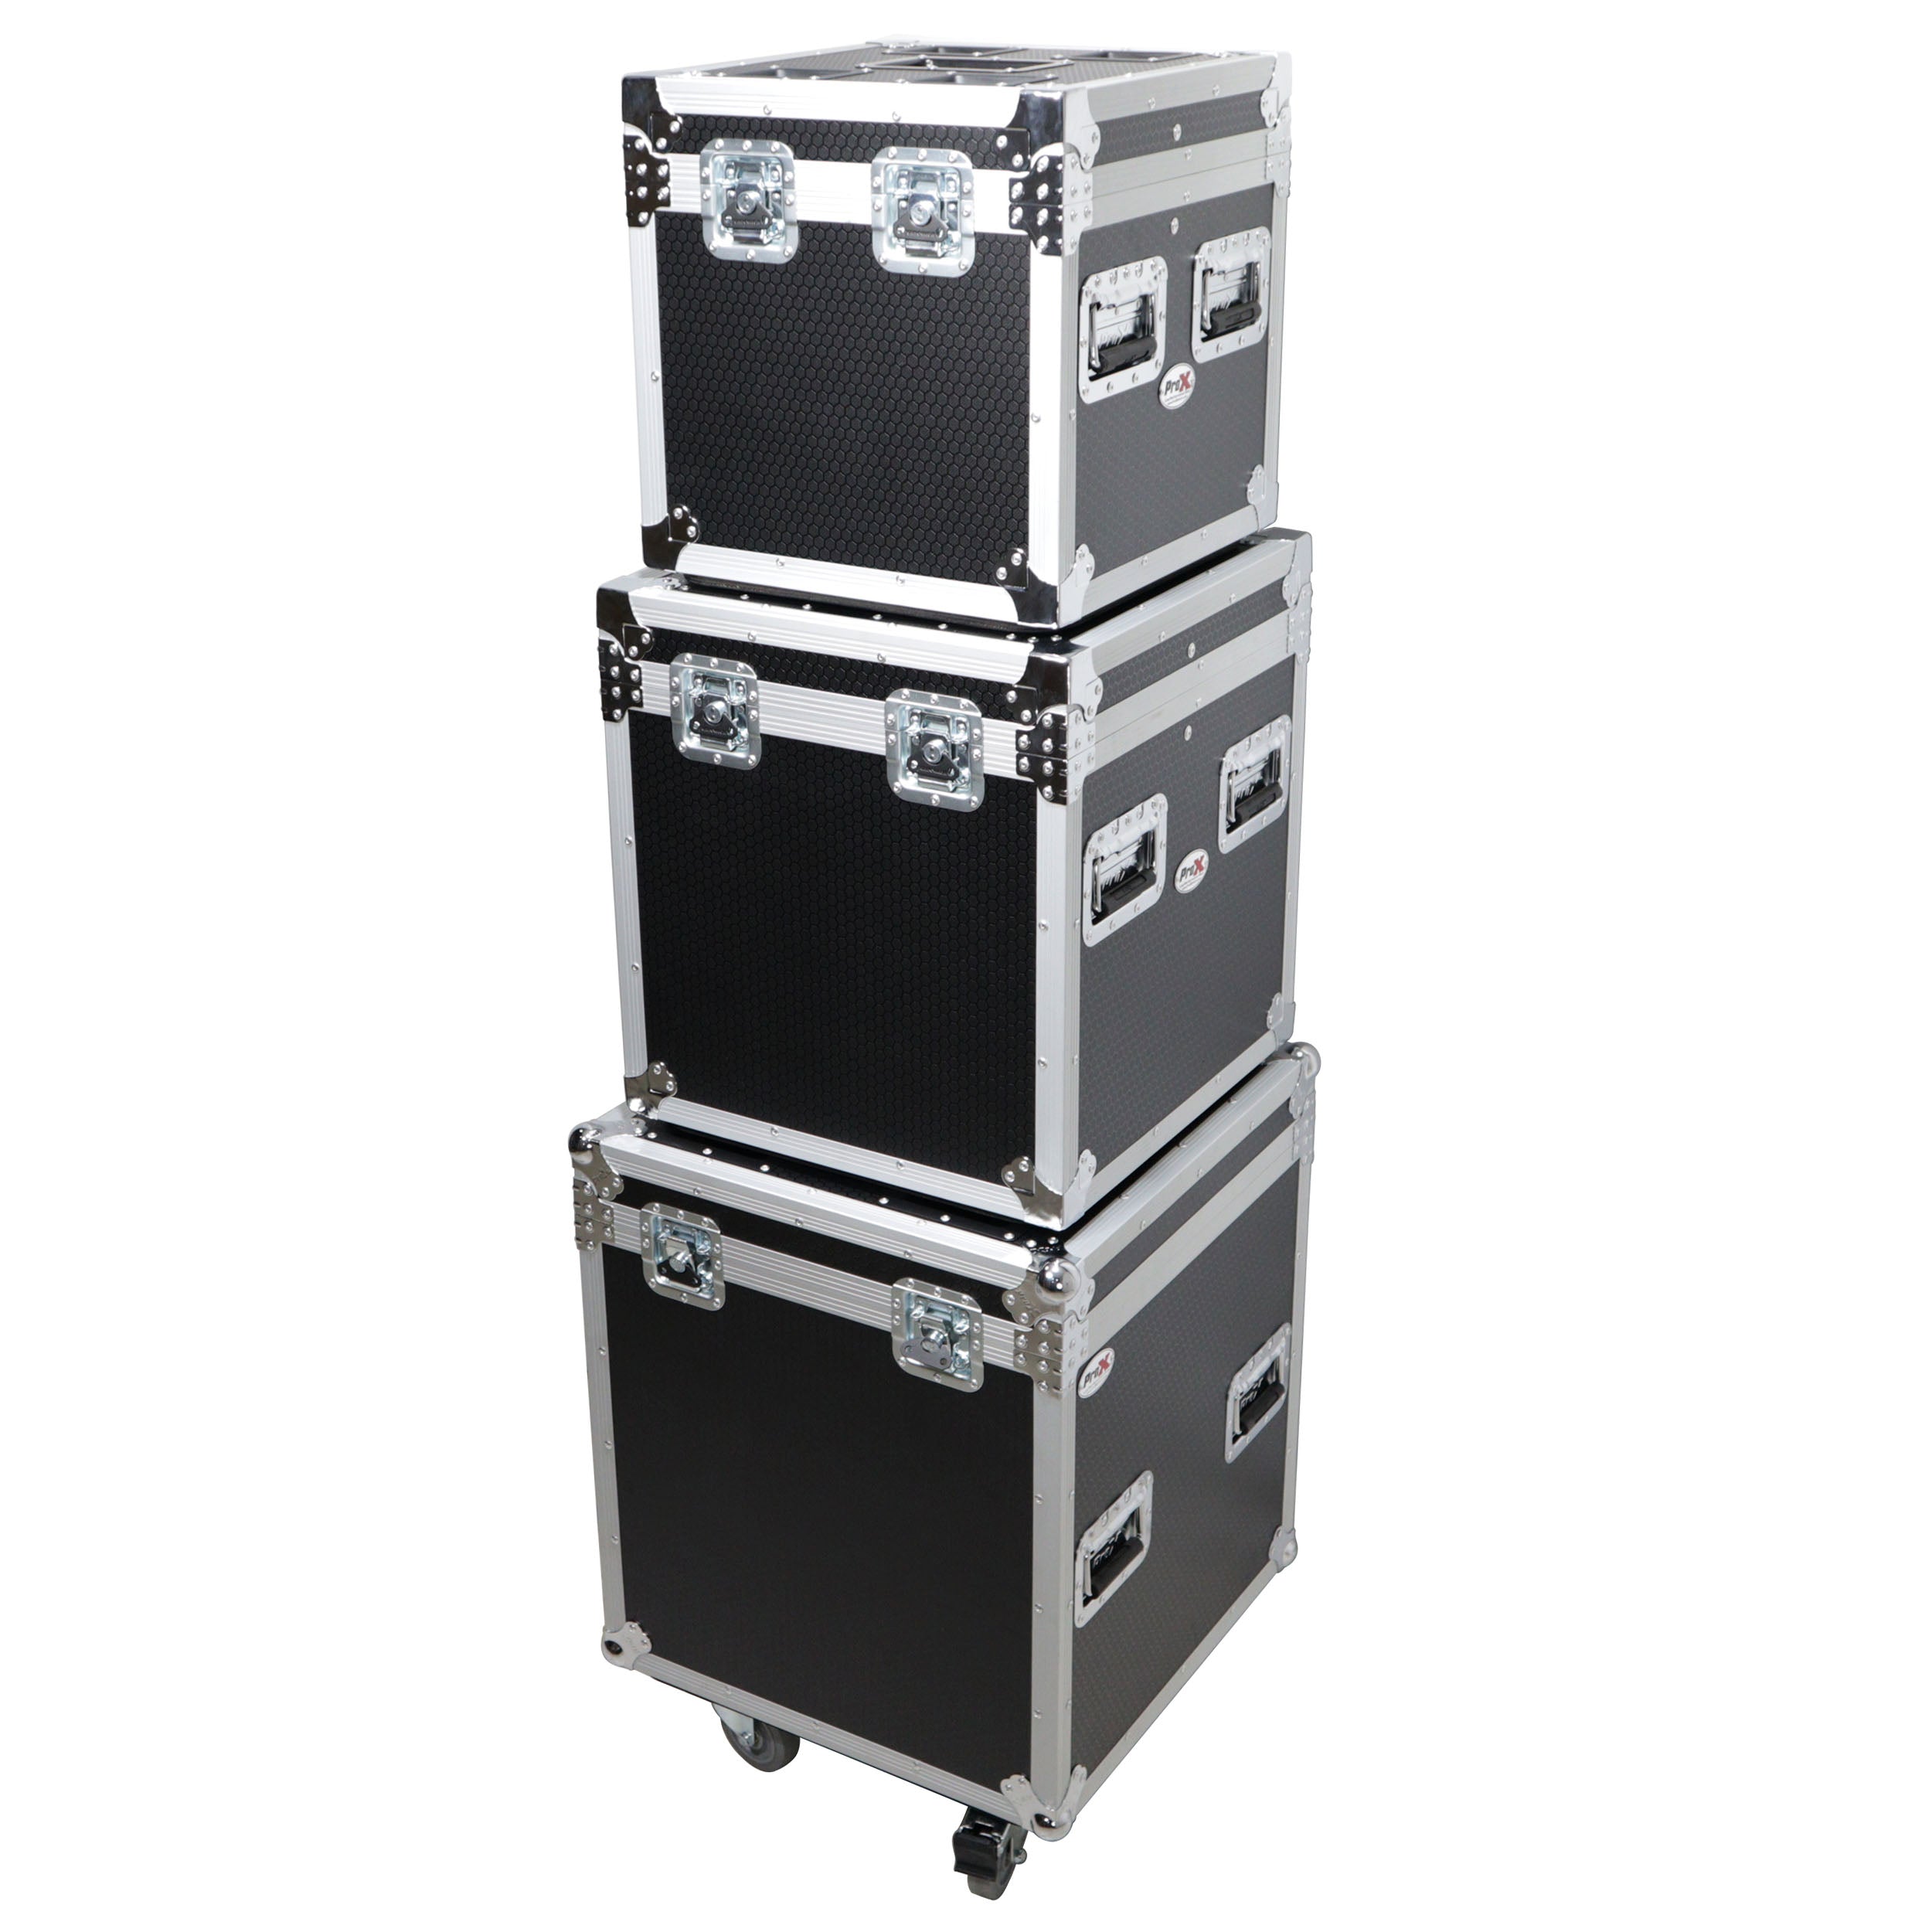 Pro X Package of 3 Utility ATA Flight Travel Storage Road Case – Includes 1-Large 1-Medium 1-Small Size with 4" Casters XS-UTL49PKG3